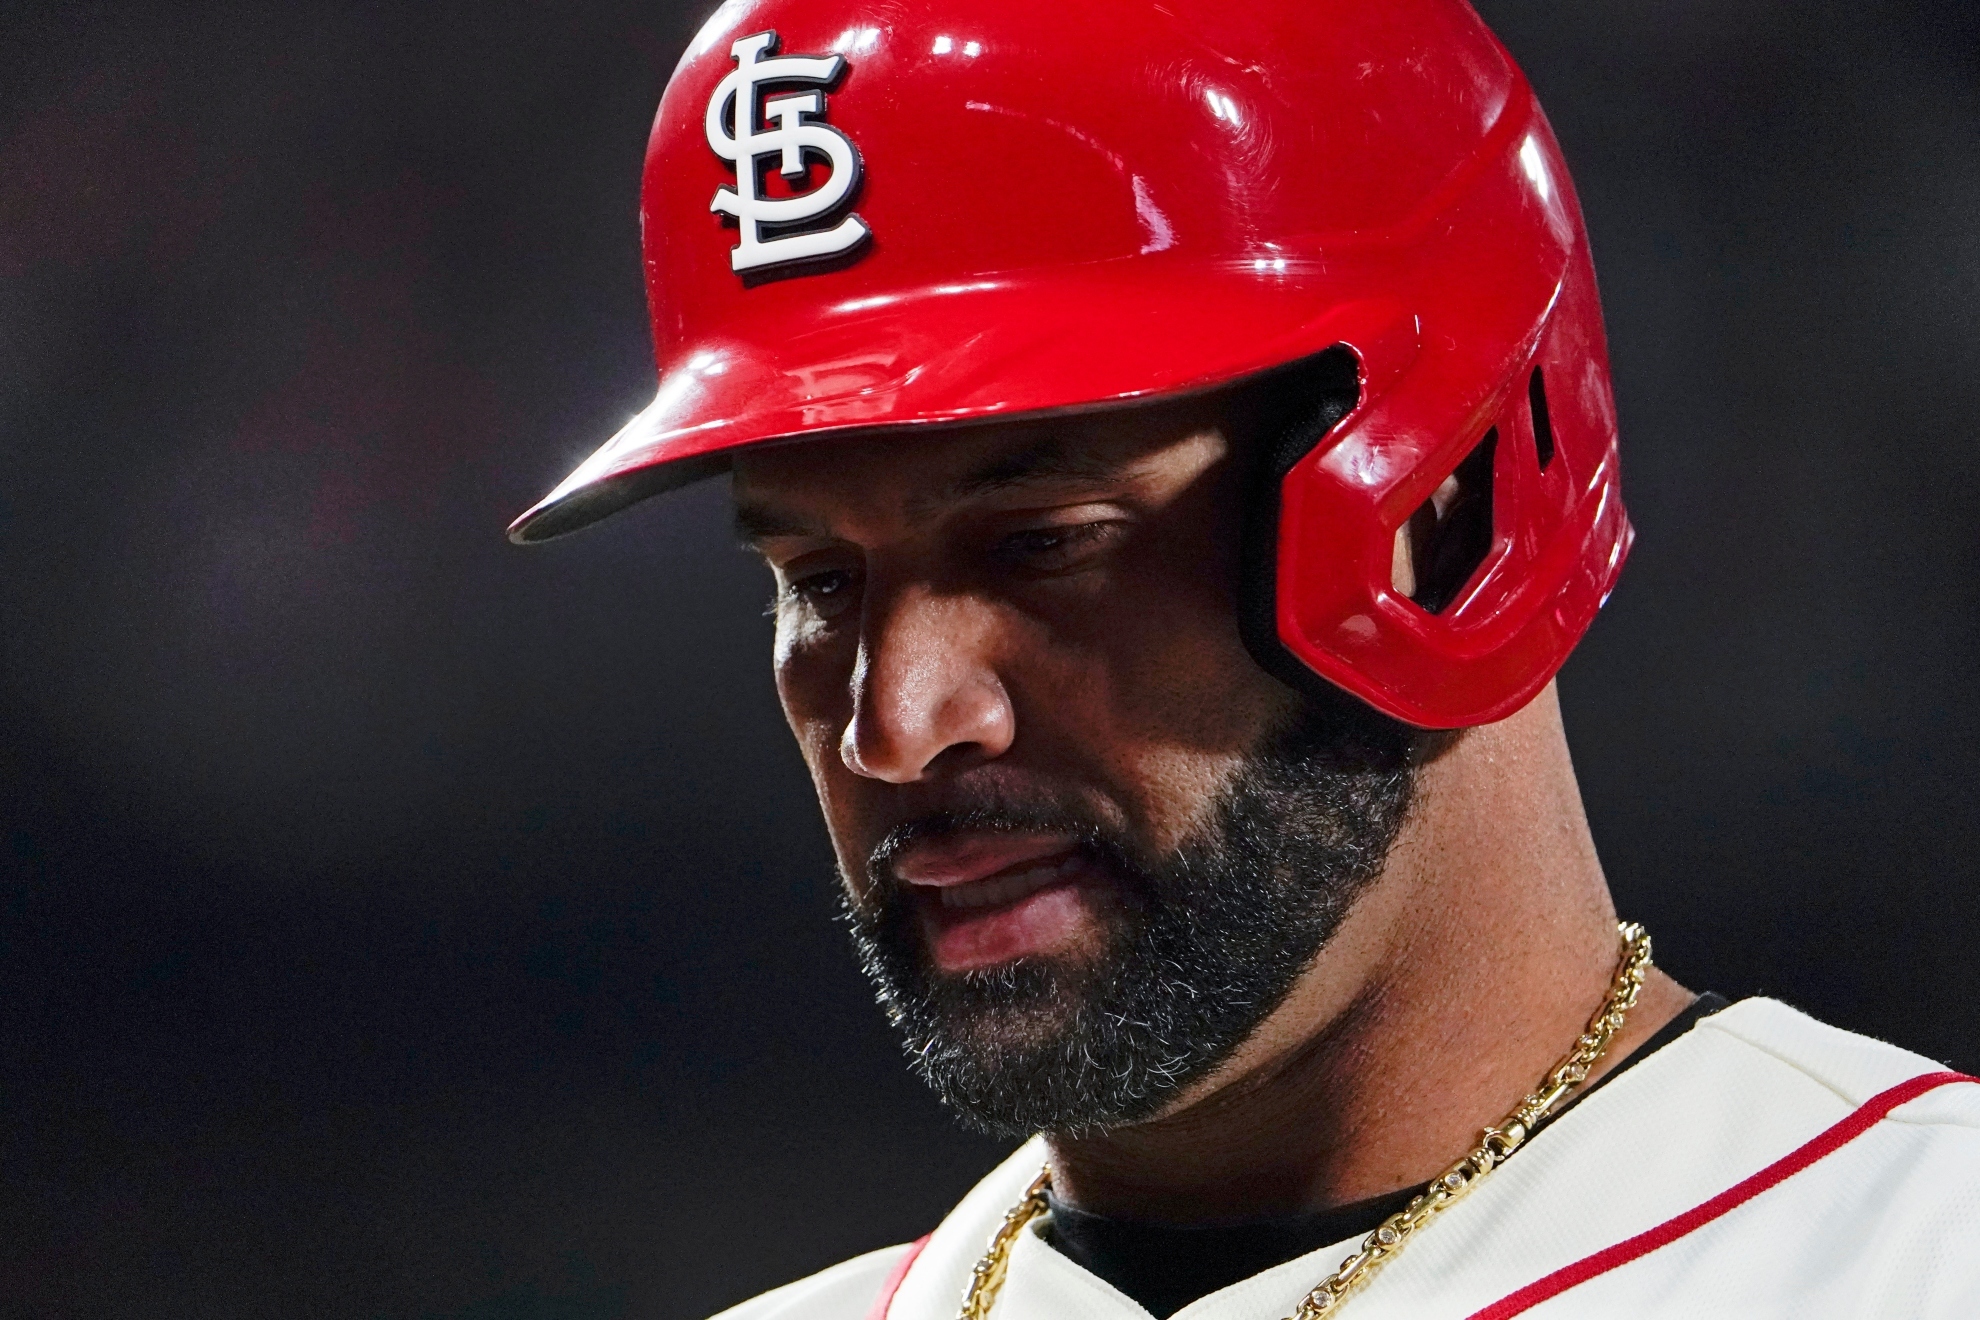 St. Louis Cardinals' Albert Pujols walks to the dugout after grounding out to Philadelphia Phillies second baseman Jean Segura during the third inning in Game 2 of an NL wild-card baseball playoff series Saturday, Oct. 8, 2022, in St. Louis / AP